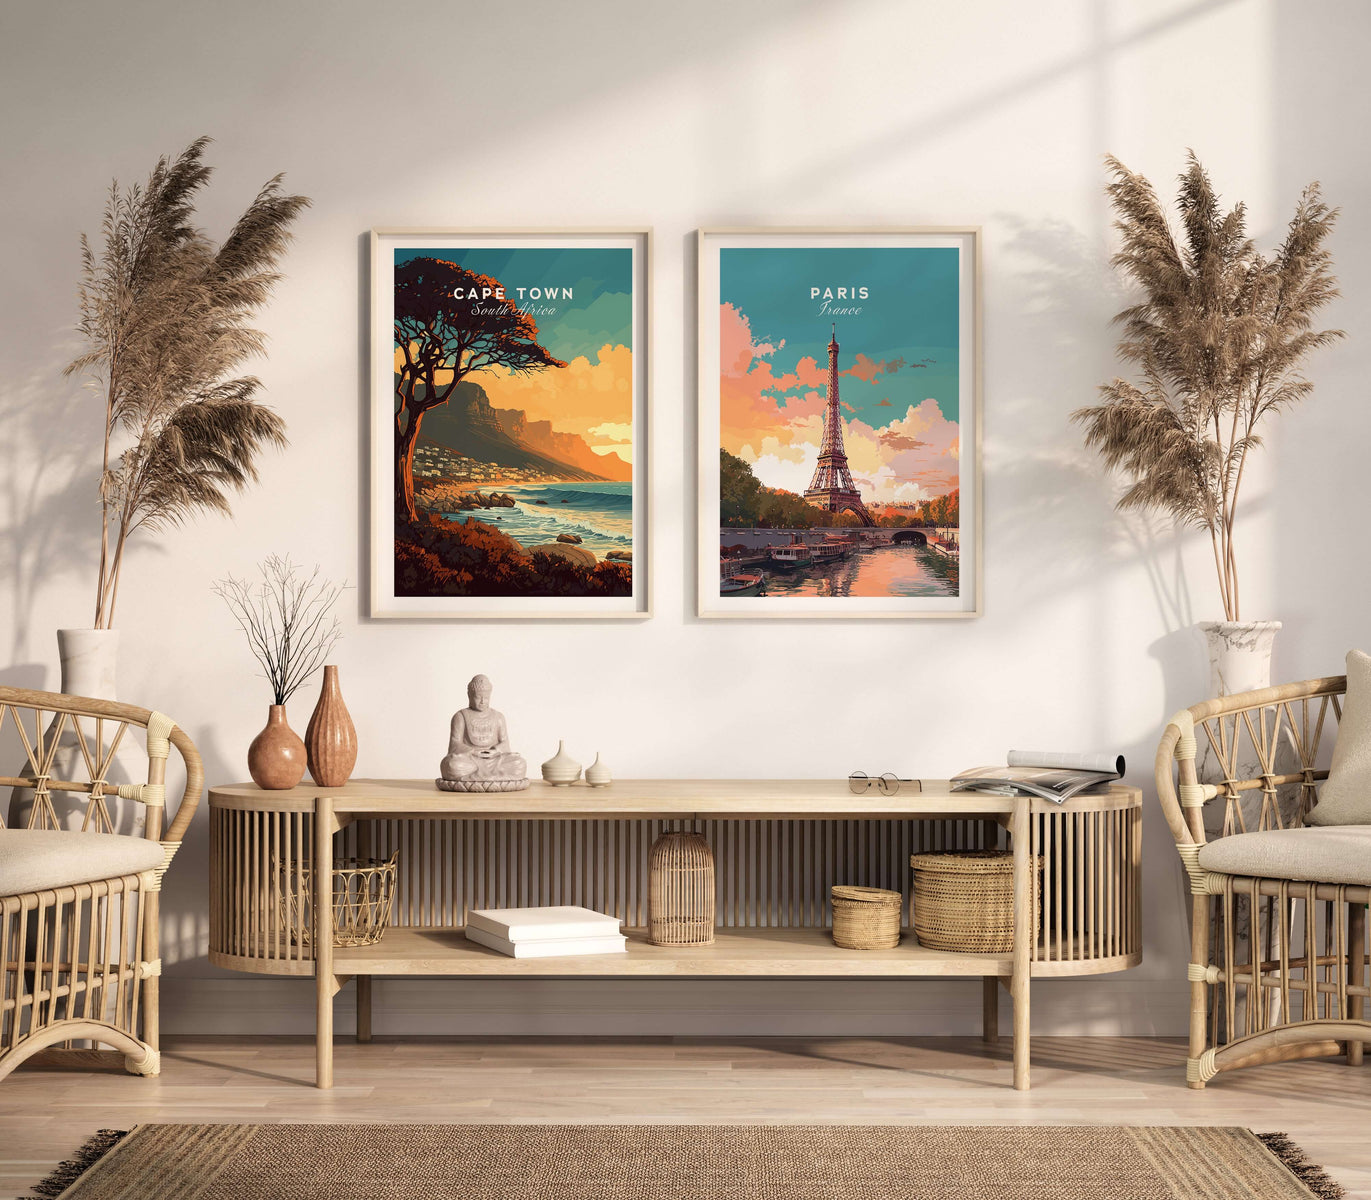 Set of two travel posters in natural wood frames on a wall in a lounge with table an chairs. The travel posters feature Cape Town at sunset and Eiffel tower in Paris. 